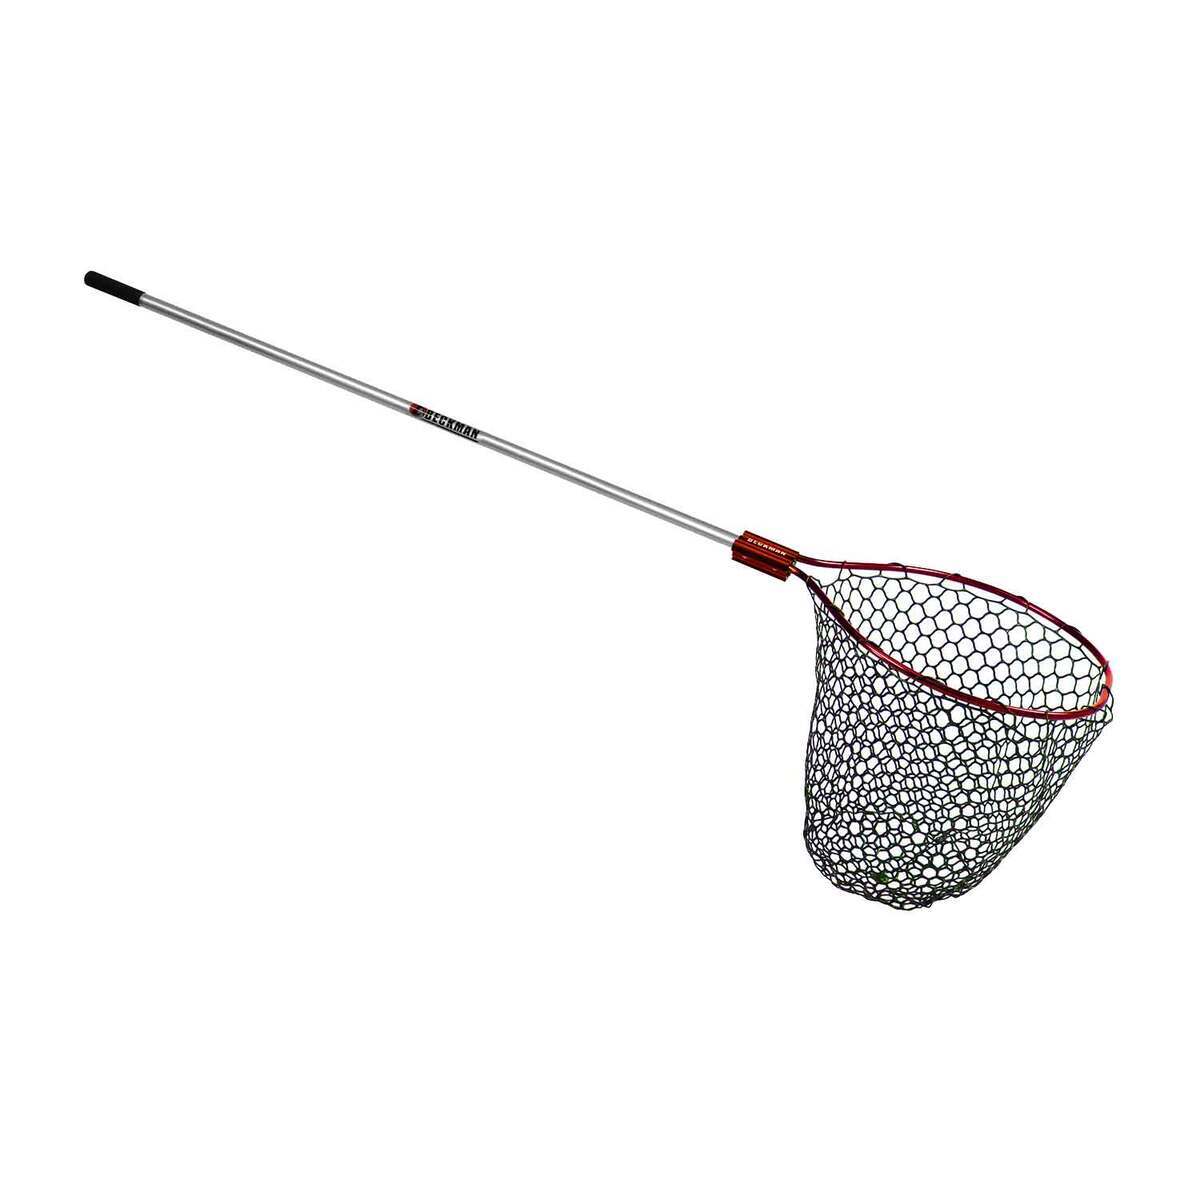 Ego Reach Large Clear Rubber 48 Handle S2 Slider Net